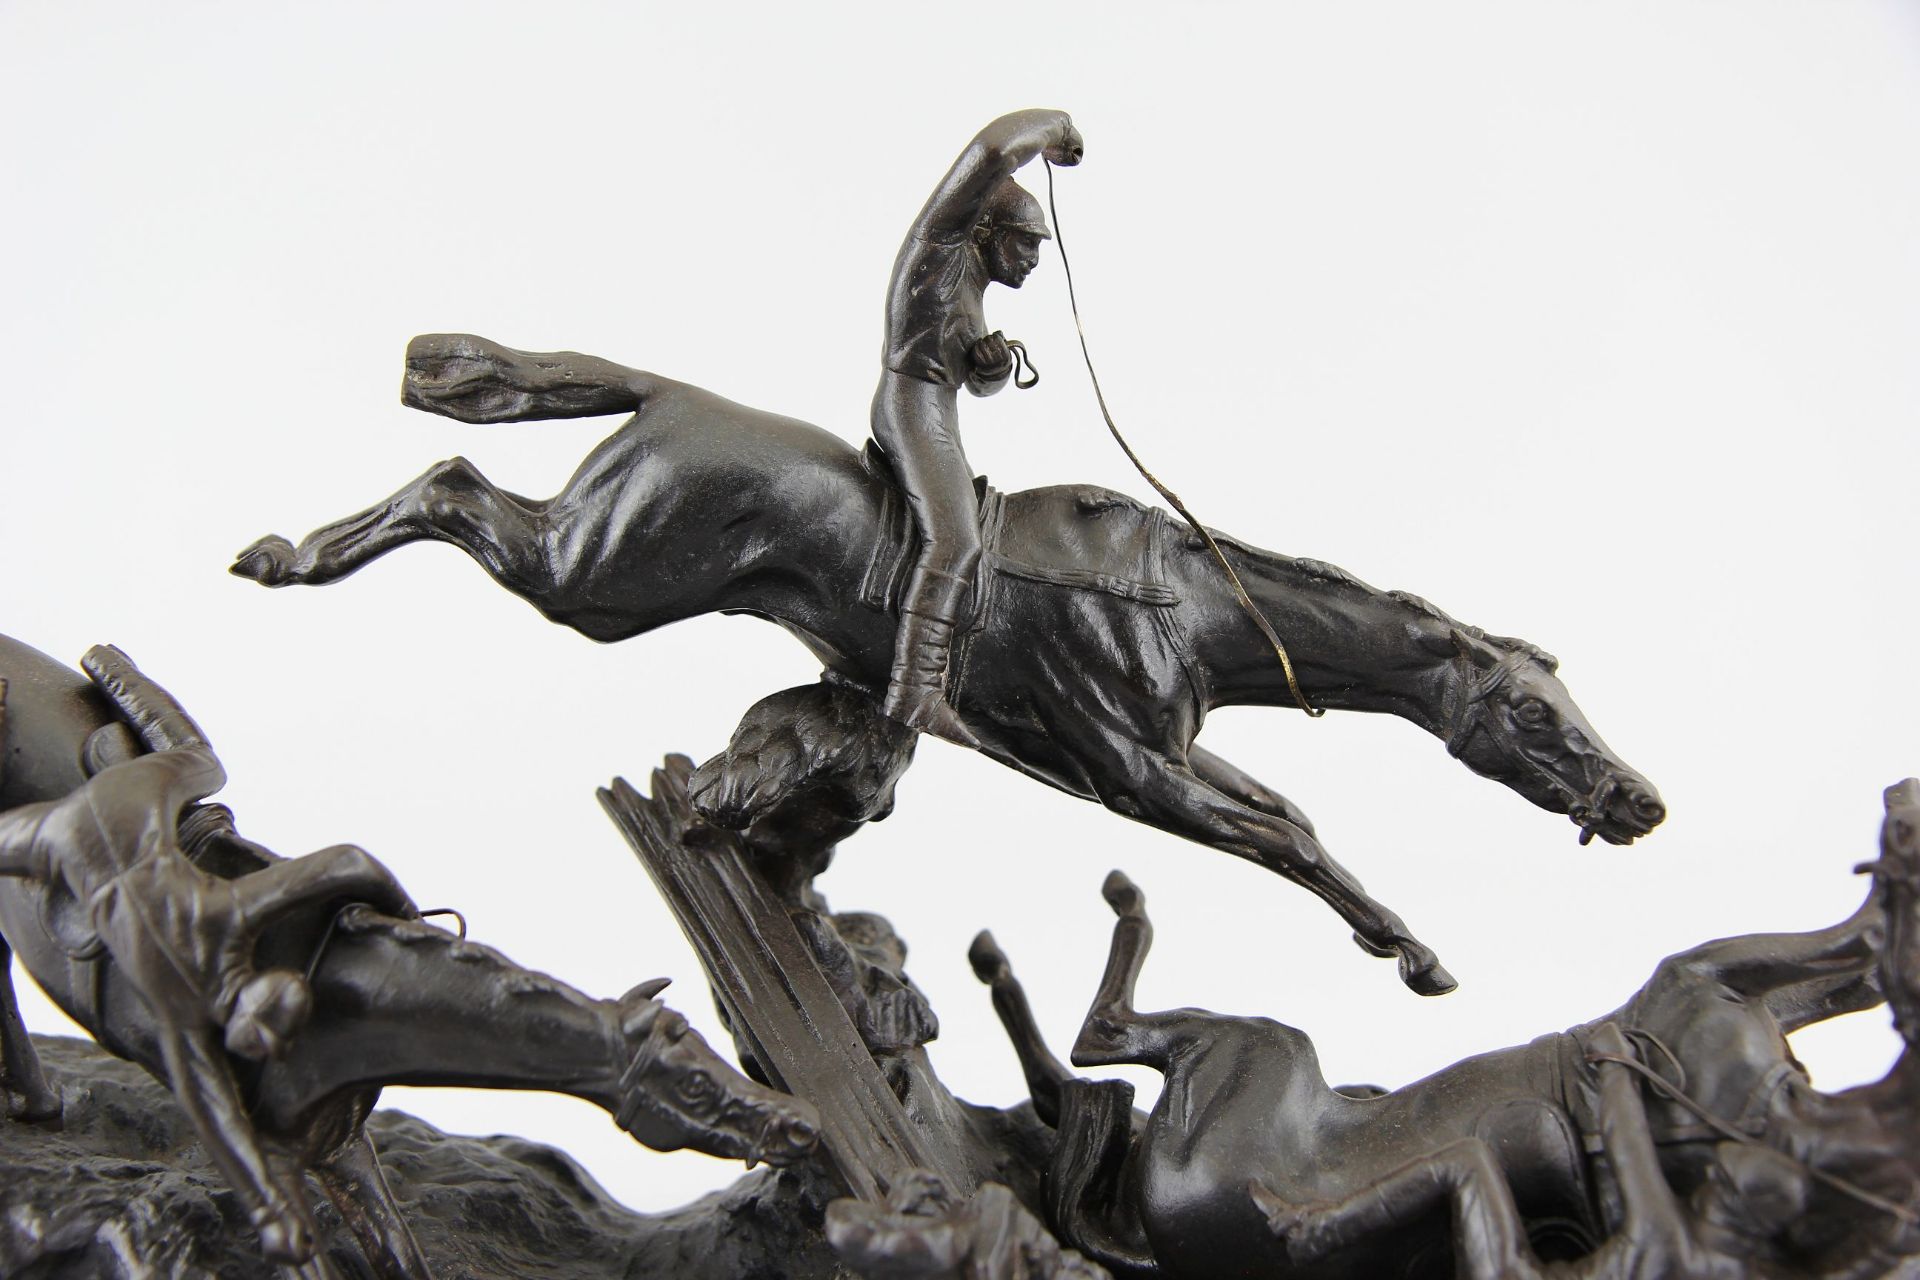 English sculptor of the 19th century Figure "Steeplechase fiasco", patinated iron cast, original - Image 5 of 7